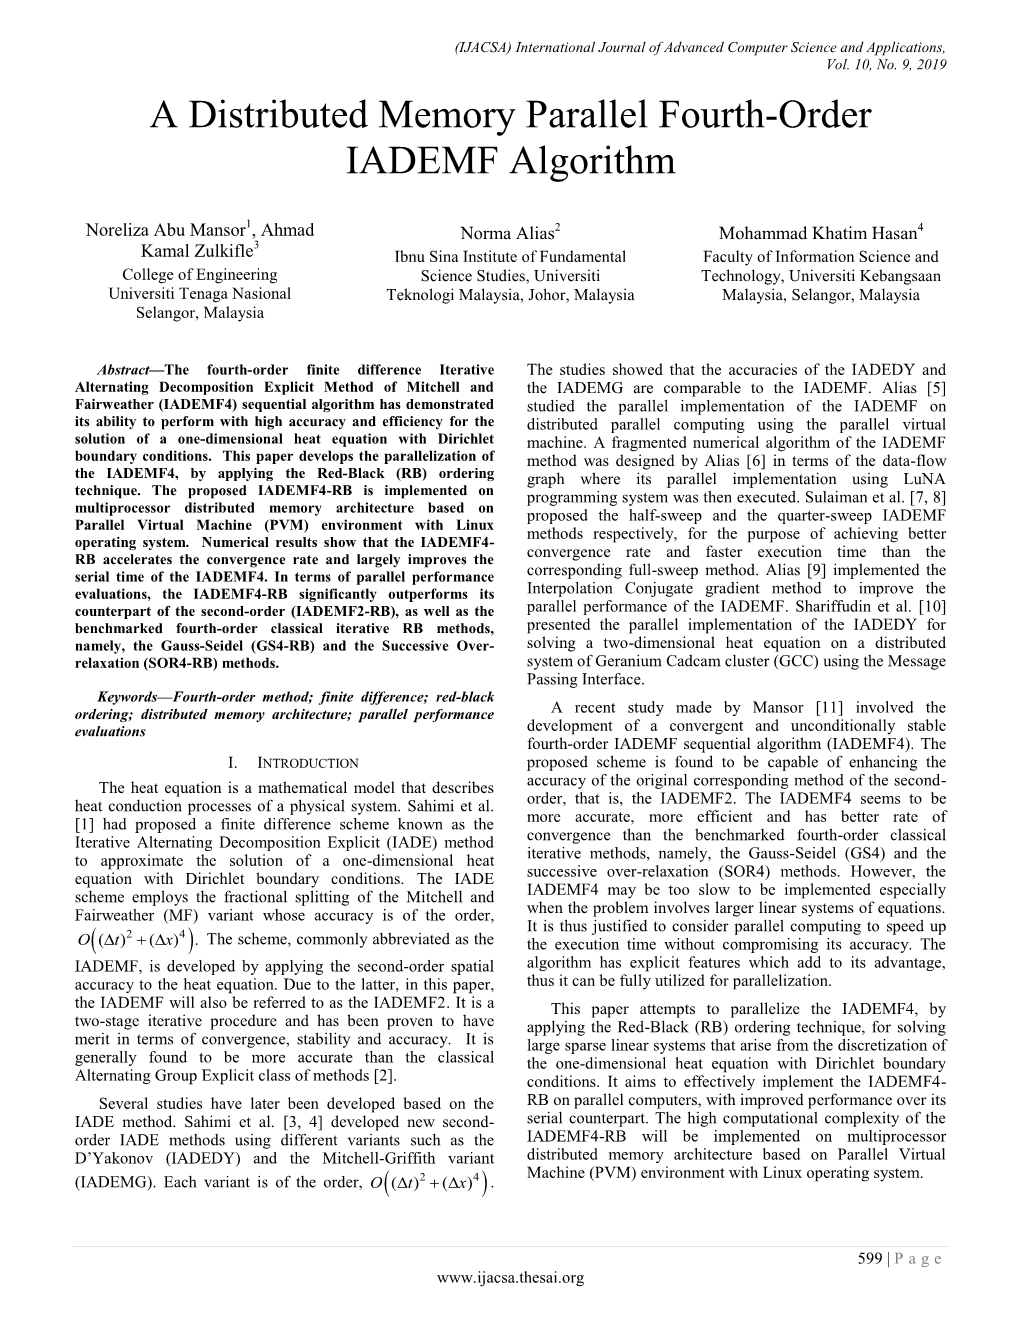 A Distributed Memory Parallel Fourth-Order IADEMF Algorithm